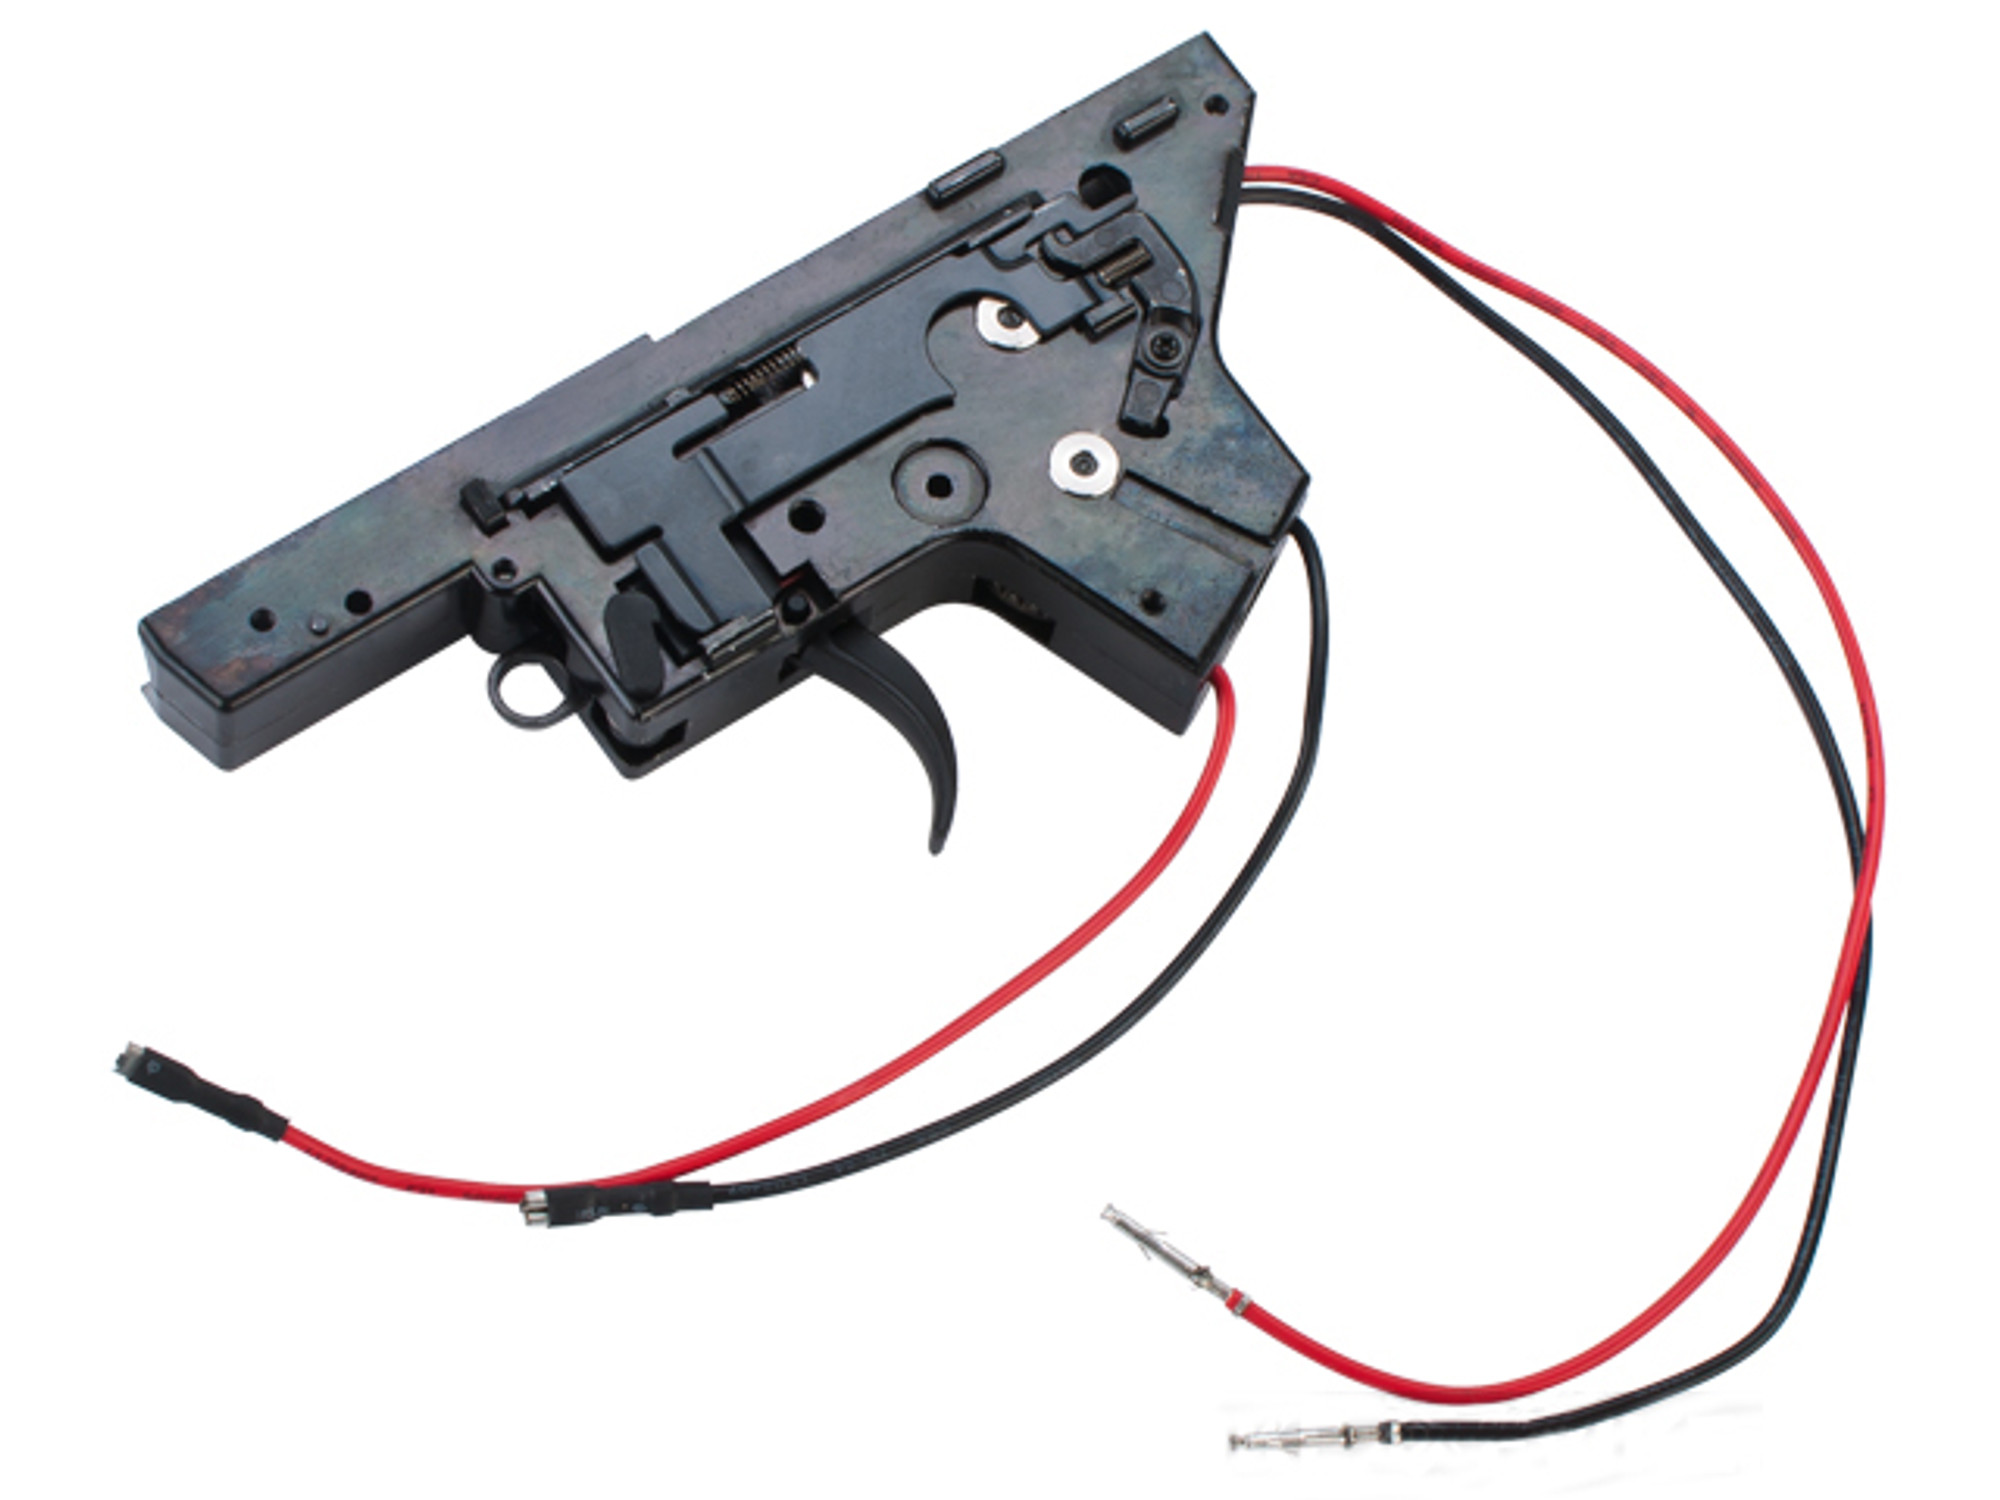 WE-Tech Complete Lower Gearbox for Katana Series Airsoft AEG Rifles